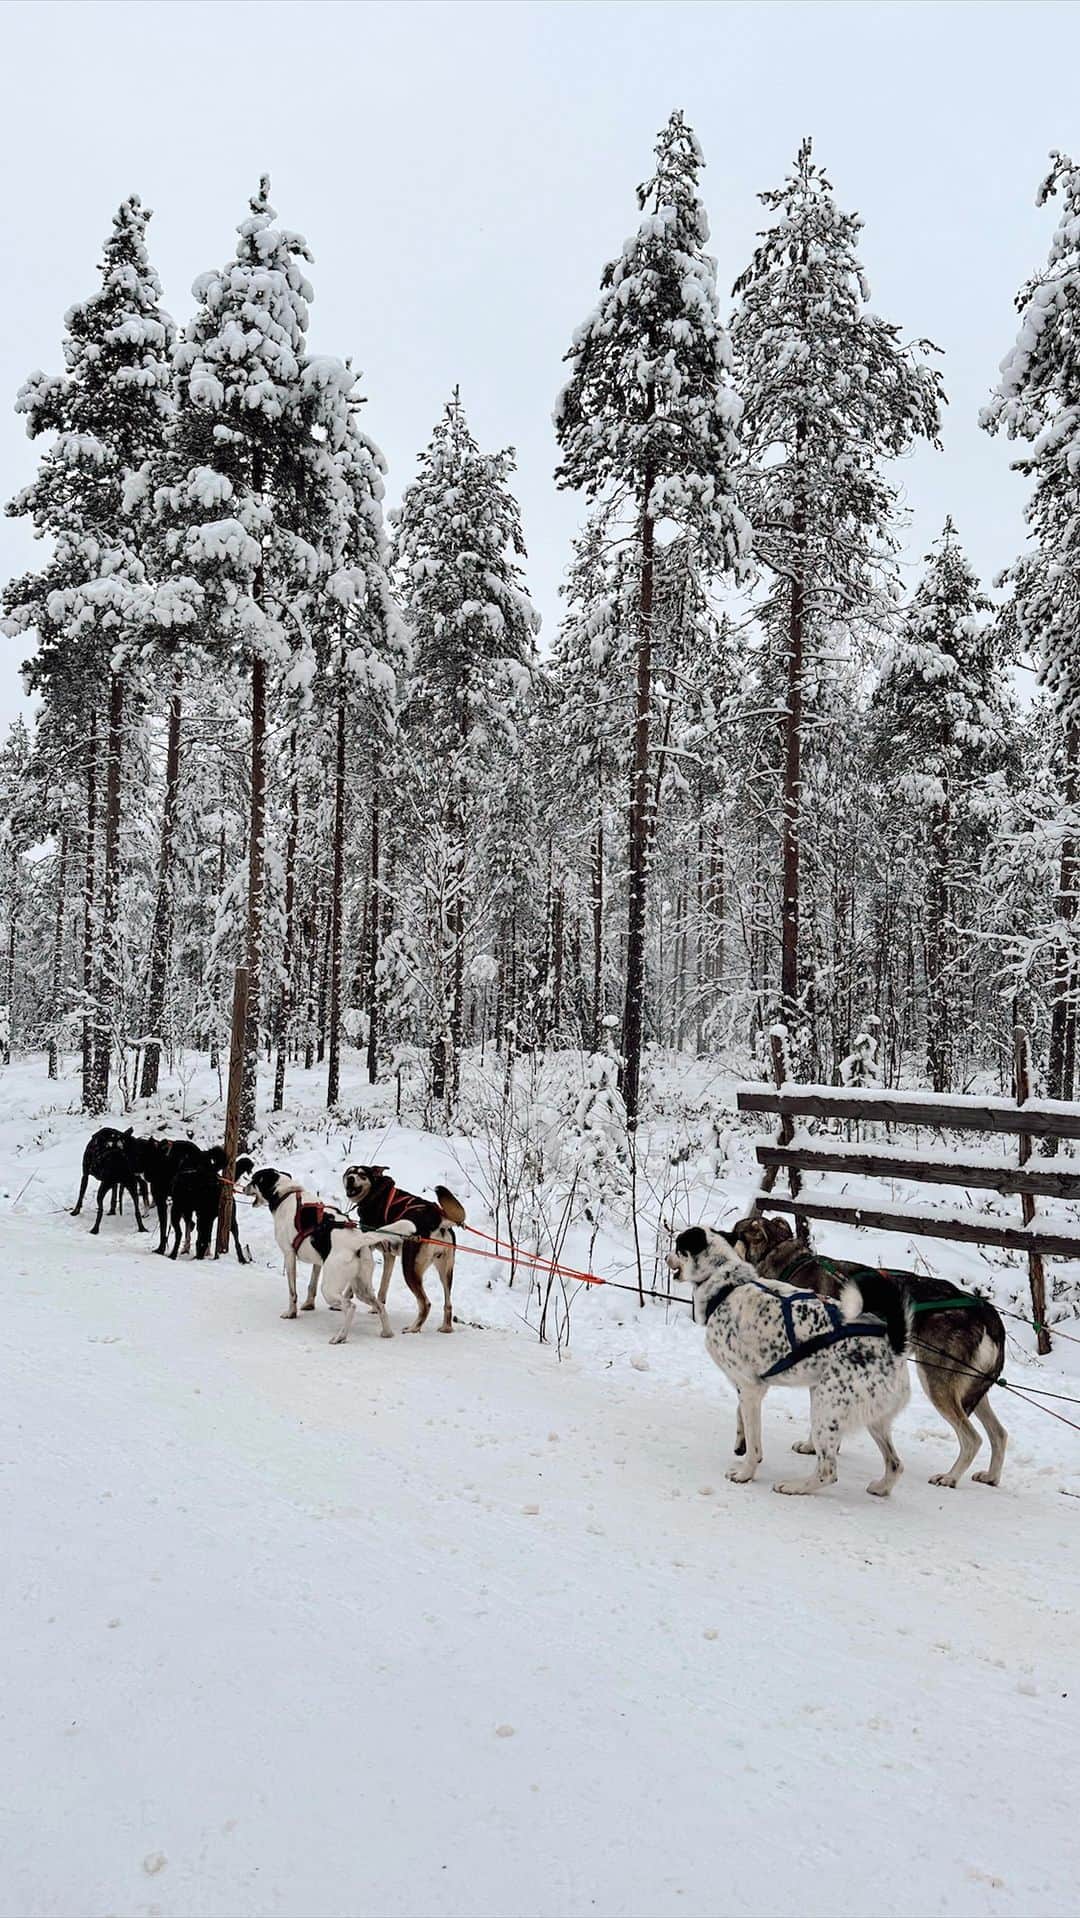 Live To Exploreのインスタグラム：「Unmissable experience in Lapland❄️   [Save for your next trip 📌 and follow @chantelle_pang for more travel tips and inspiration]  One of the many cool things we did on our trip to Rovaniemi was to go on a artic animal and wildlife tour curtesy of @GetYourGuide  We booked this trip for £382.28 for two and got picked up early in the morning from Santa Claus Village by our tour guide. (Note: there’s no public transport or shuttle buses to Santa Claus Village from Apukka Resort in the early hours of the day so we got a taxi for around 26€)  The tour lasted about 6 hours as we drove from city centre to our first stop where we got to go on reindeer sleigh rides and husky rides. From there was an hour journey to Ranua Wildlife Park where we saw different species of artic animals  Ranua Wildlife Park is a responsibly operating wildlife park, where they sometimes receive and treat wounded animals which are no longer able to survive in the wild.   The tour includes a lookout point but sadly we couldn’t make it due to traffic and the lack of day light by the time we got back to Rovaniemi - oh well, next time!  Overall it was a great tour if you wants to tick off a few things of your artic bucket list and to see some beautiful wildlife 🩵  @getyourguidecommunity  #travel #travelreel #travelreels #lapland #rovaniemi #wildlife #naturelover#articanimals #adventure #adventuretravel #travelblogger #getyourguide ##getyourguidecommunity #globaltrotter #globaltravelgram #globaltravel」